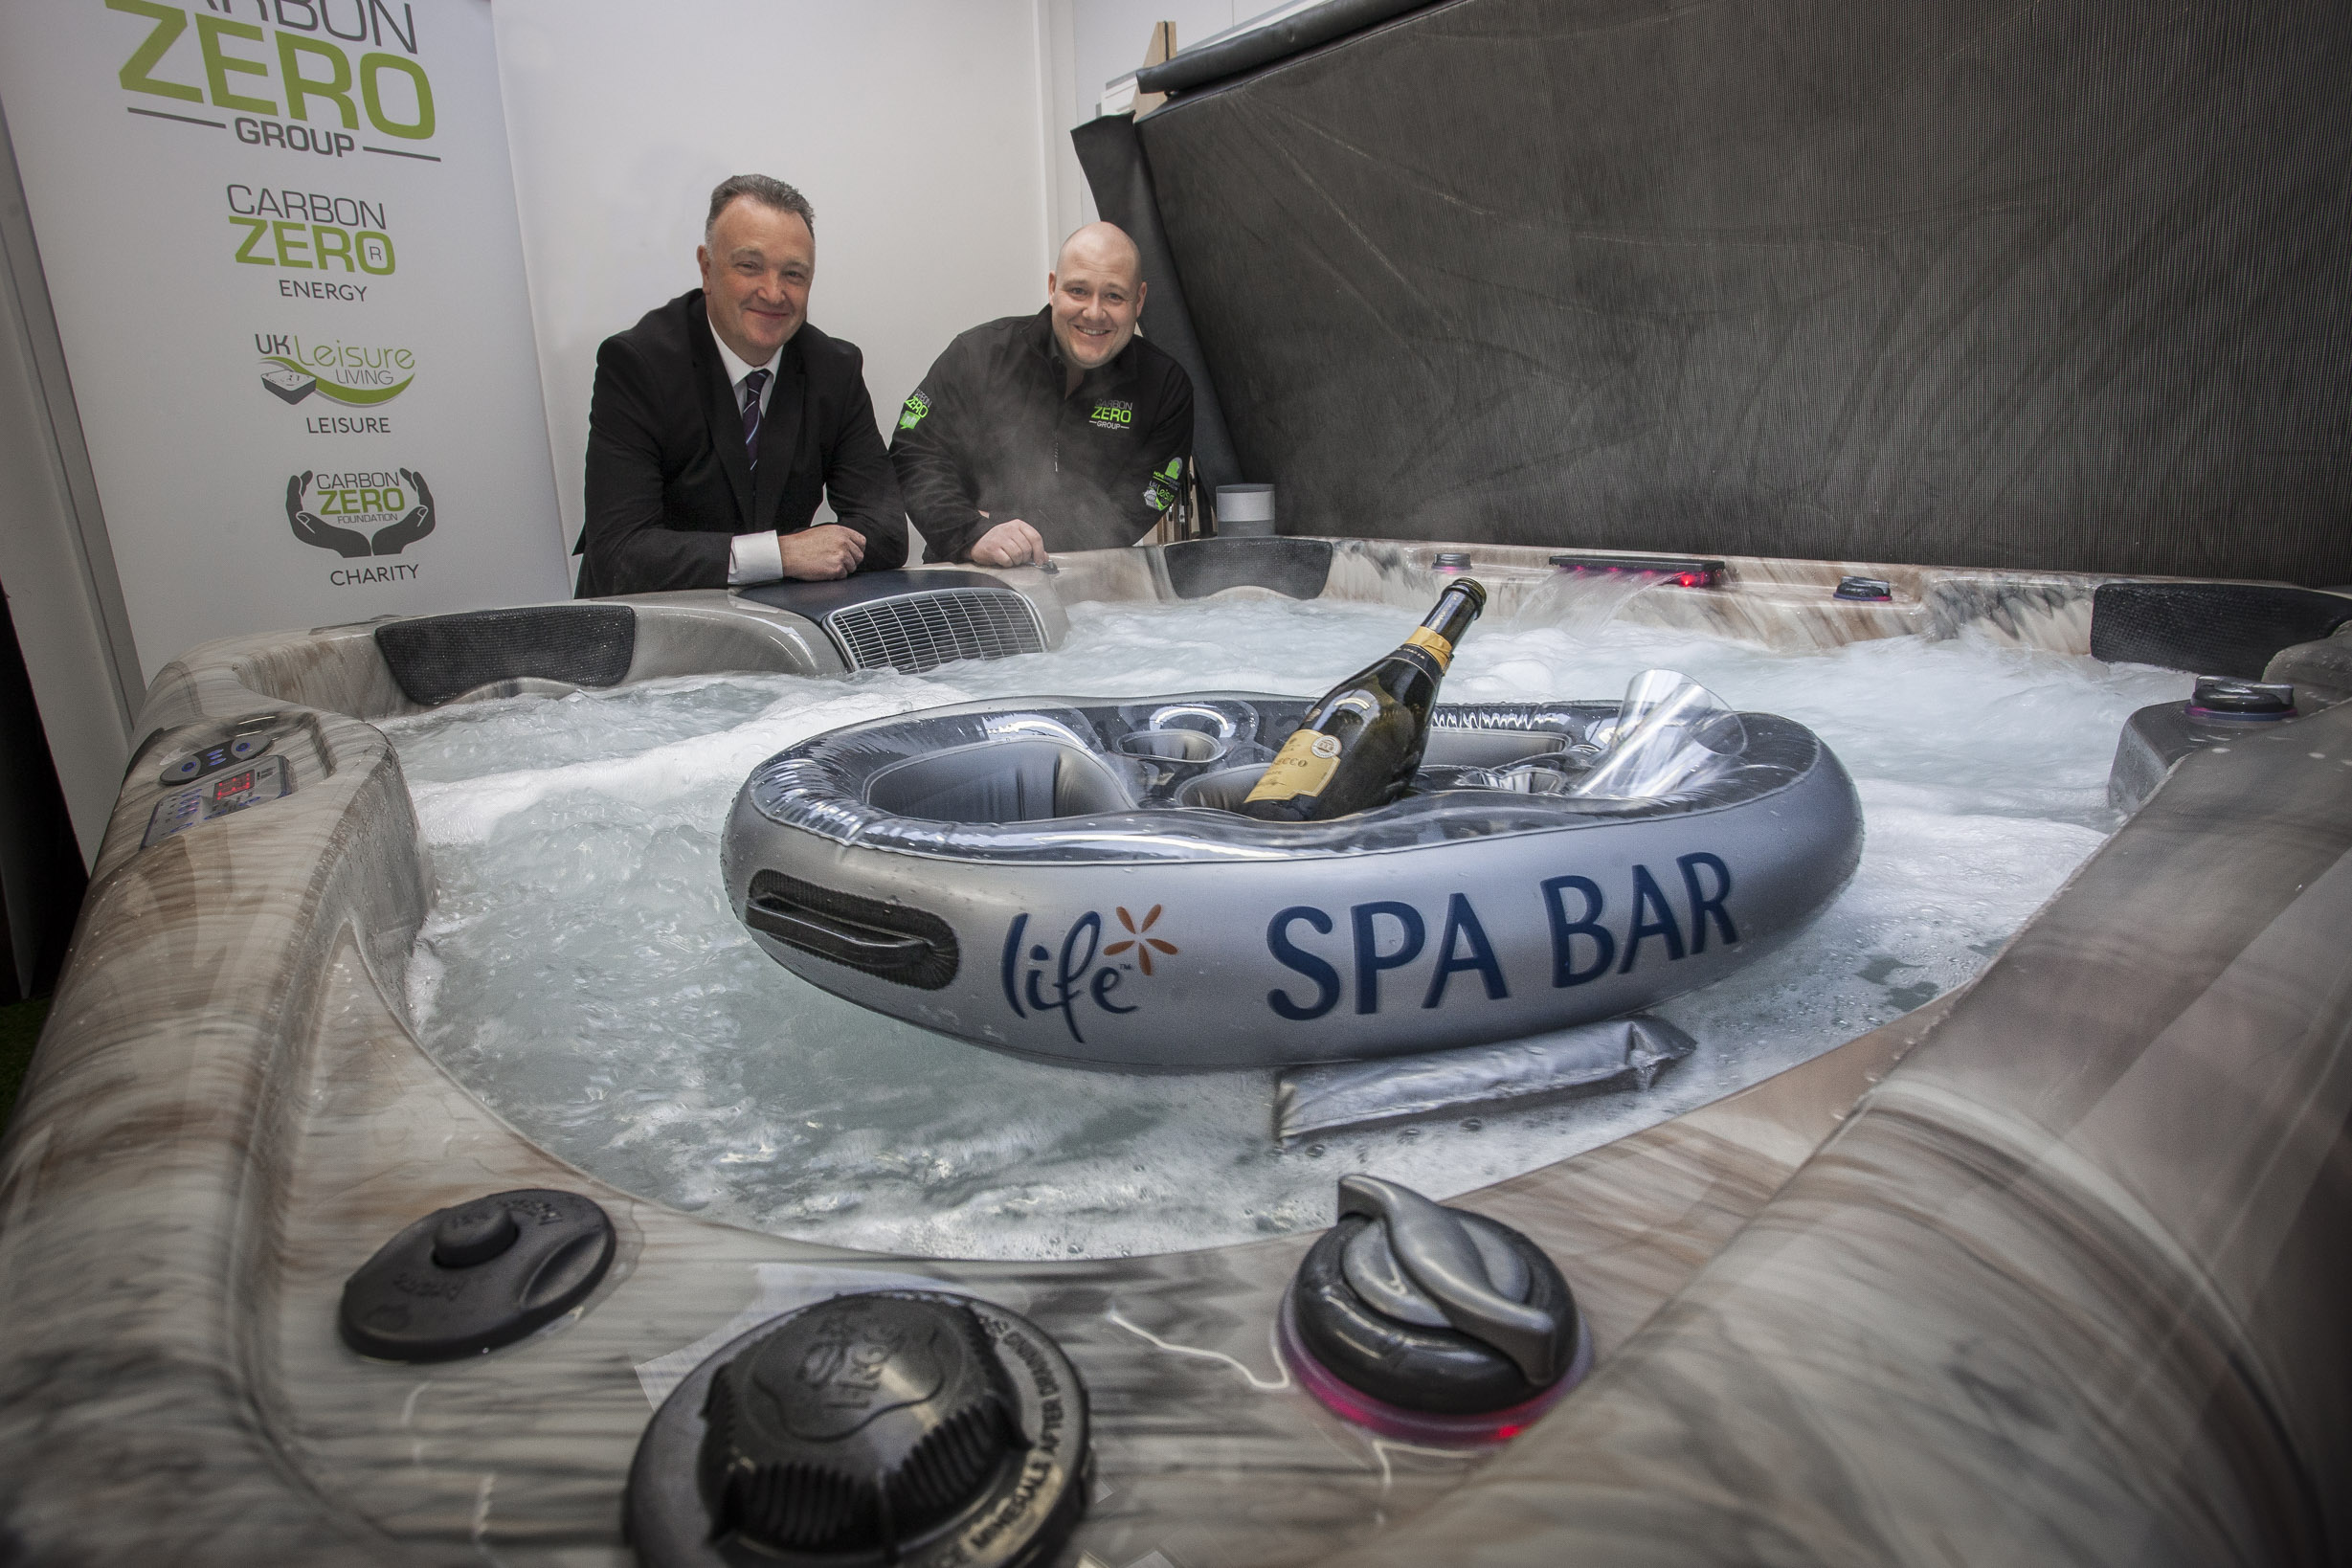 Entrepreneur is aiming to make a big splash with Hollywood-style hot tubs